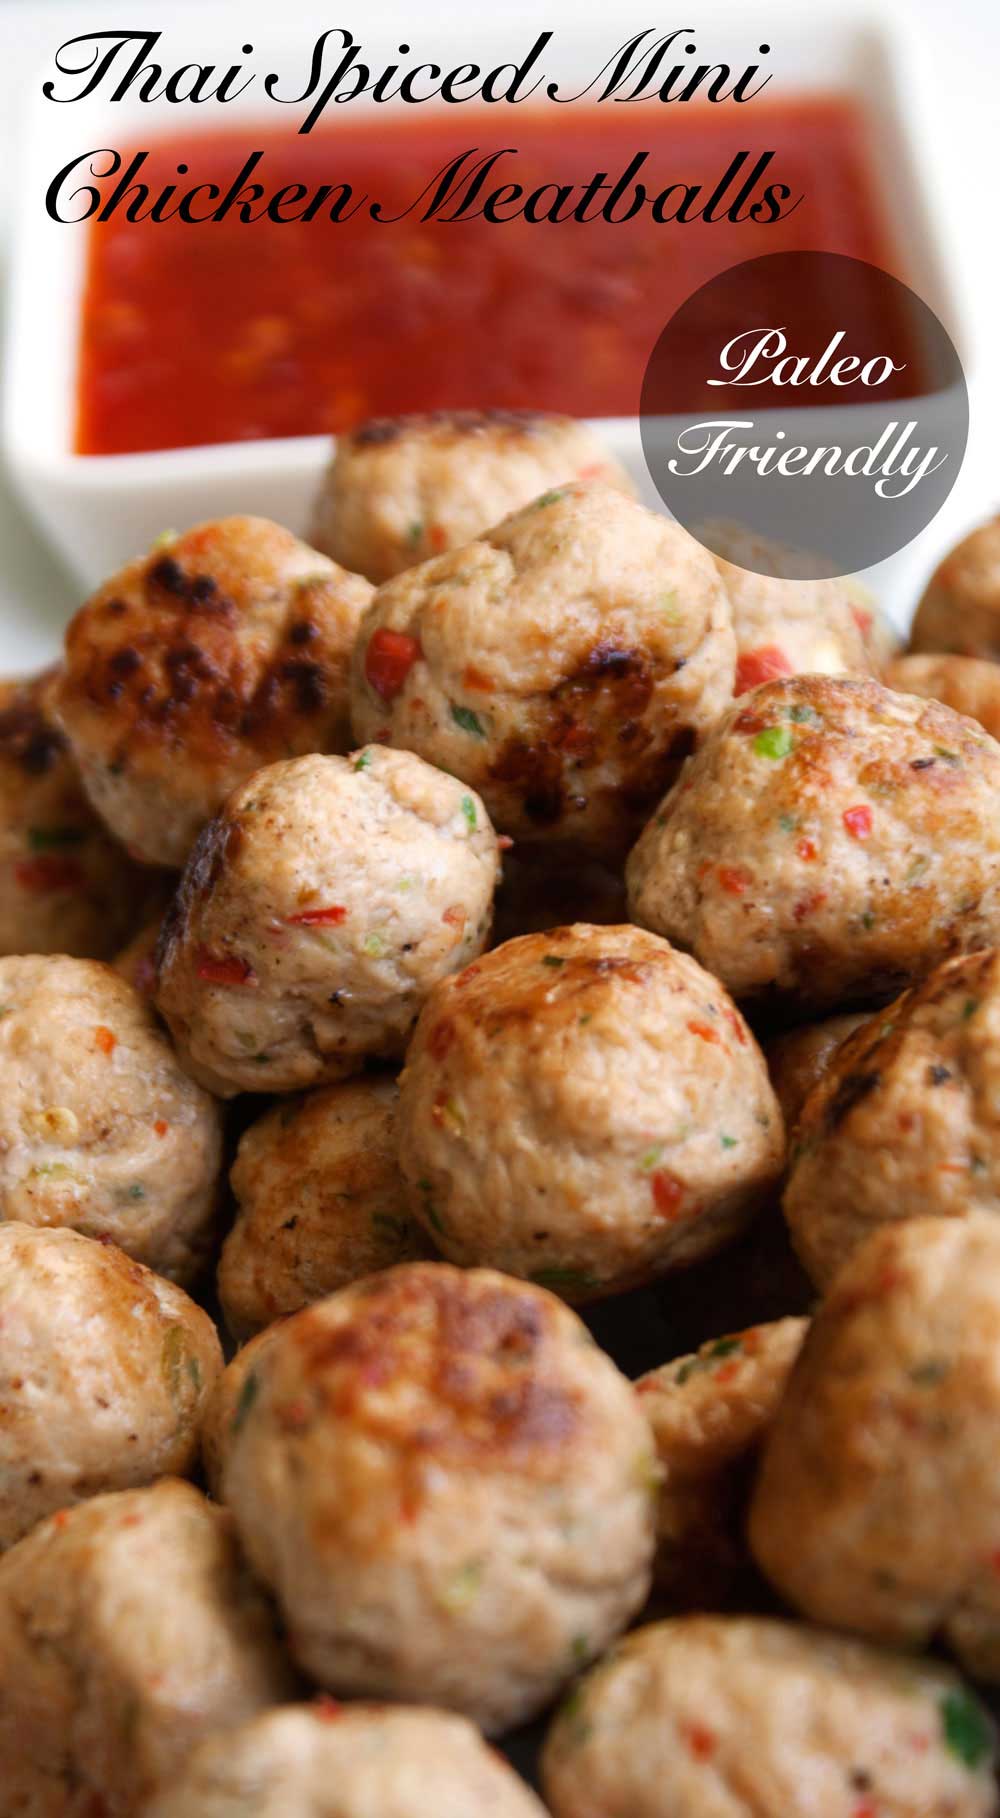 Thai Spiced Mini Chicken Meatballs. These are packed with wonderful Thai flavours. Garlic, ginger, chilli and coriander. Totally scrumptious. #Glutenfree #Paleo